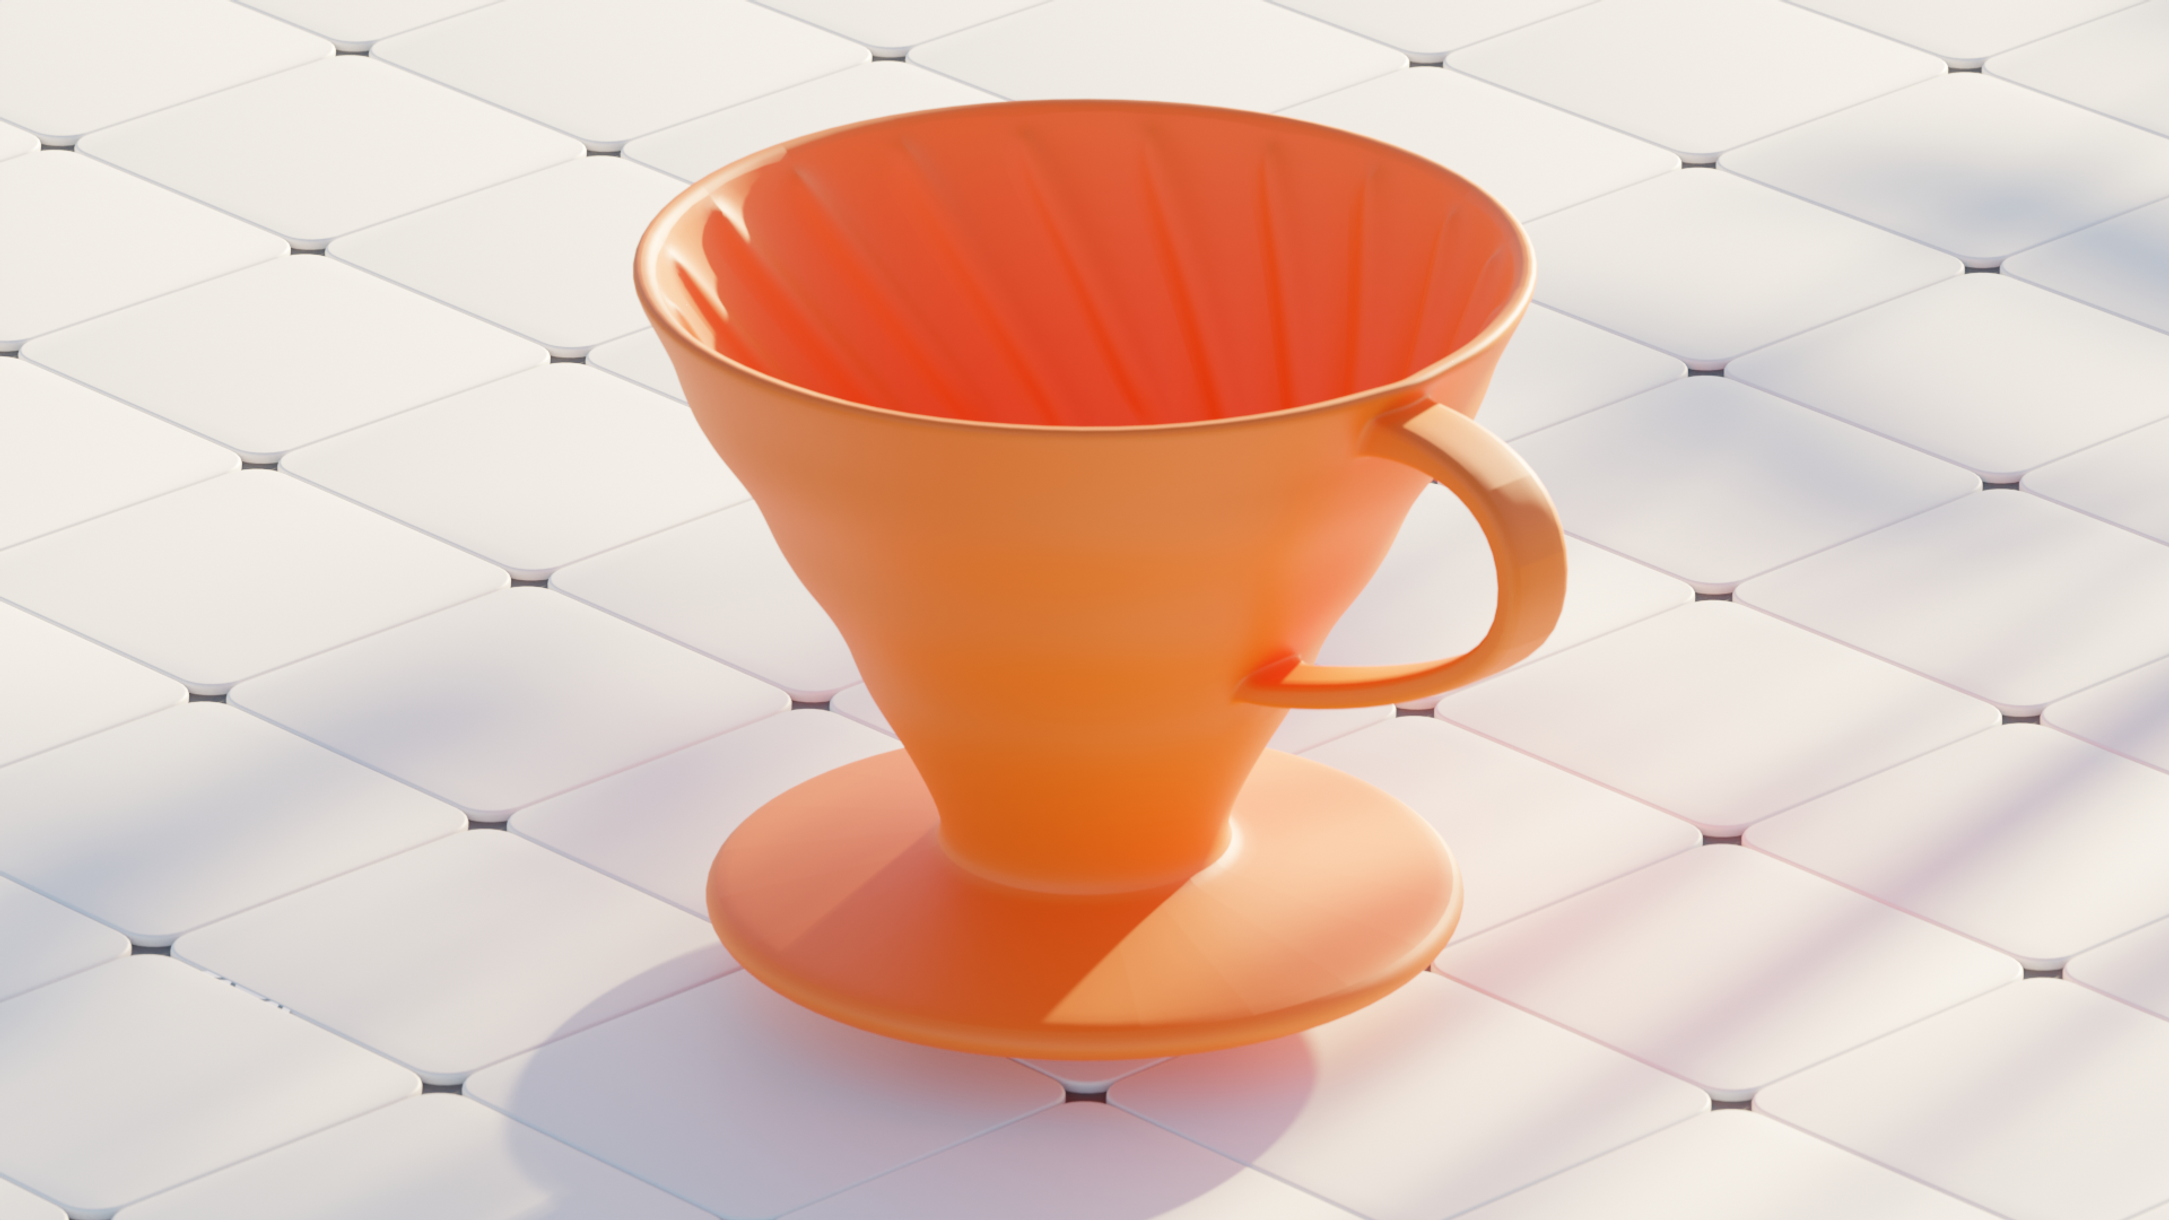 A 3d render of a coffee filter